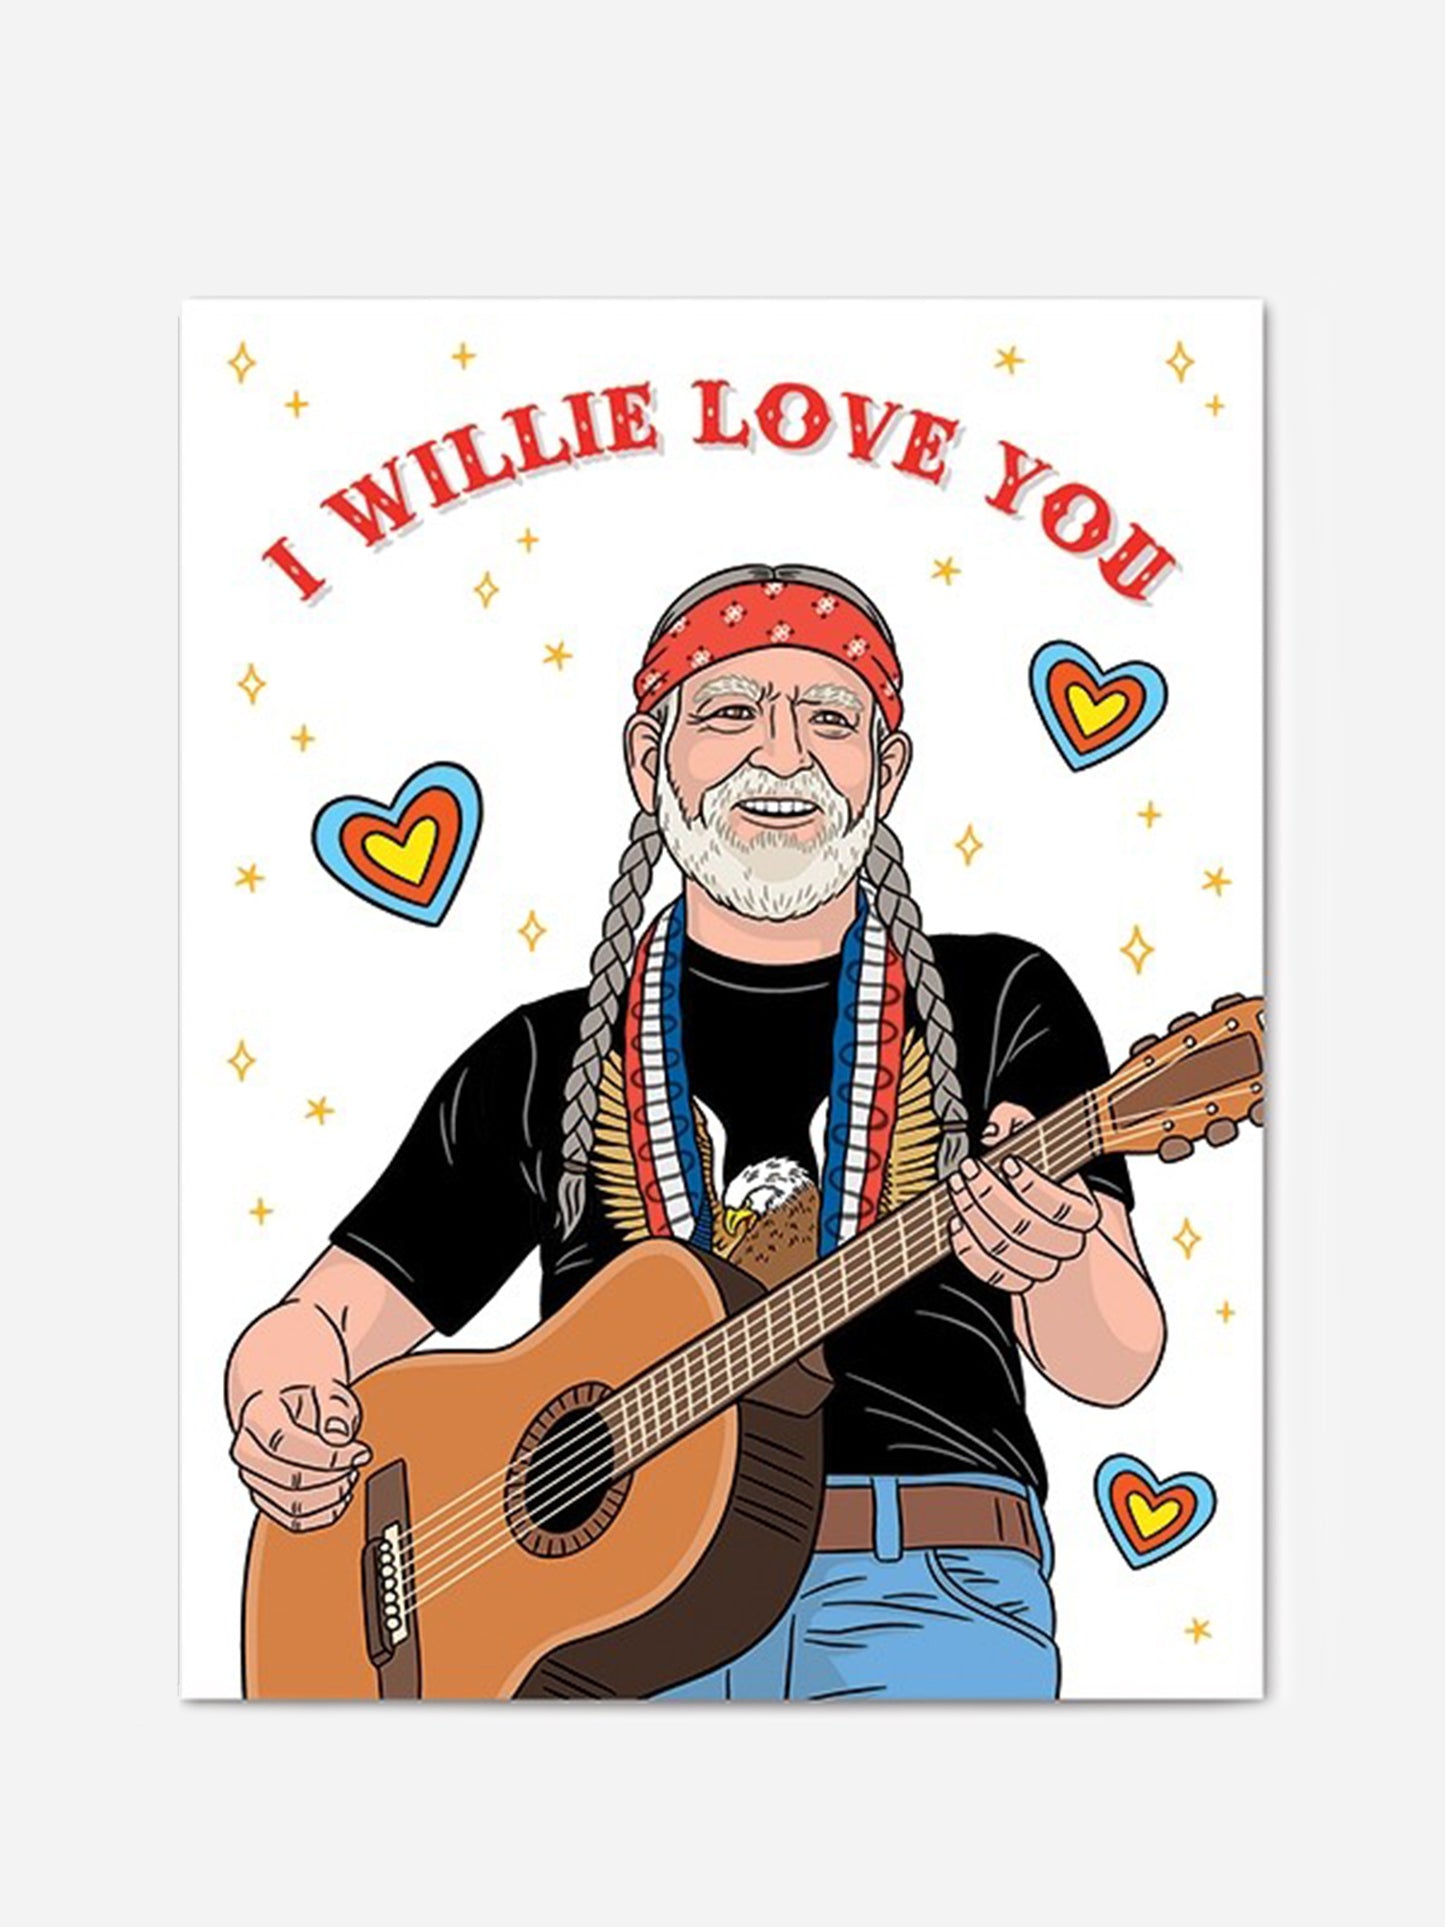 The Found I Willie Love You Card